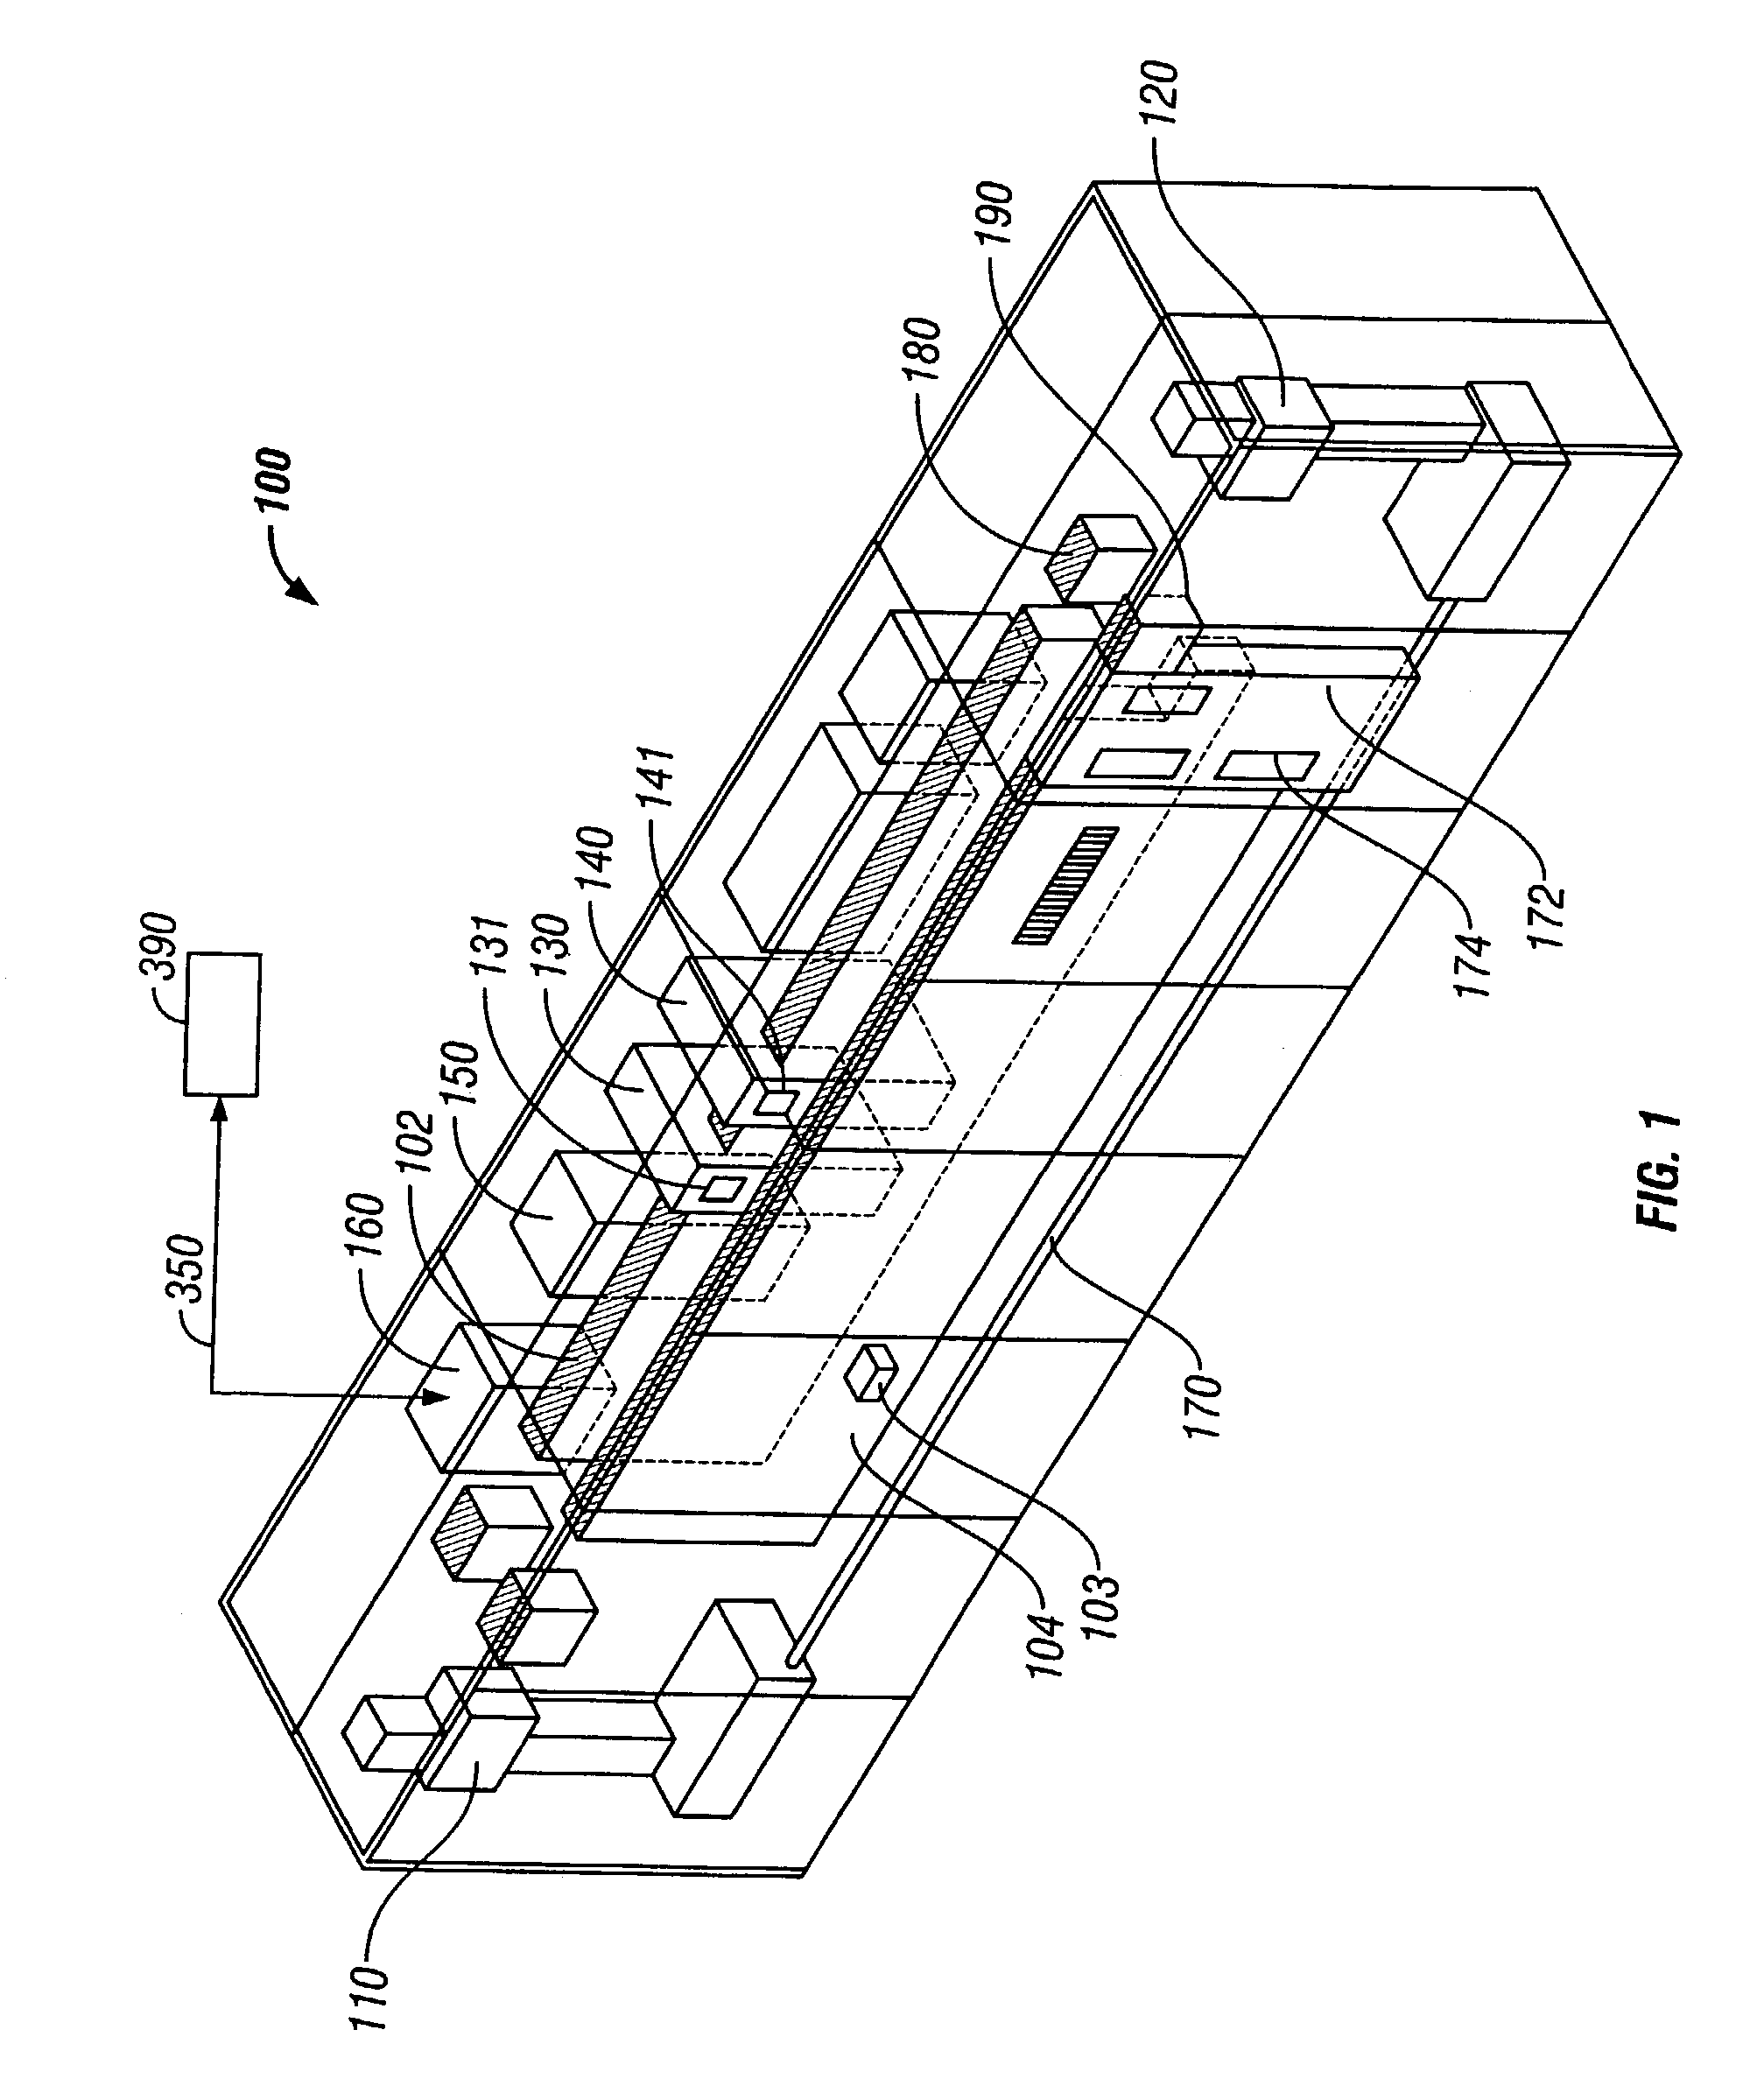 System and method of providing and relocating a portable storage canister in an automated data storage library